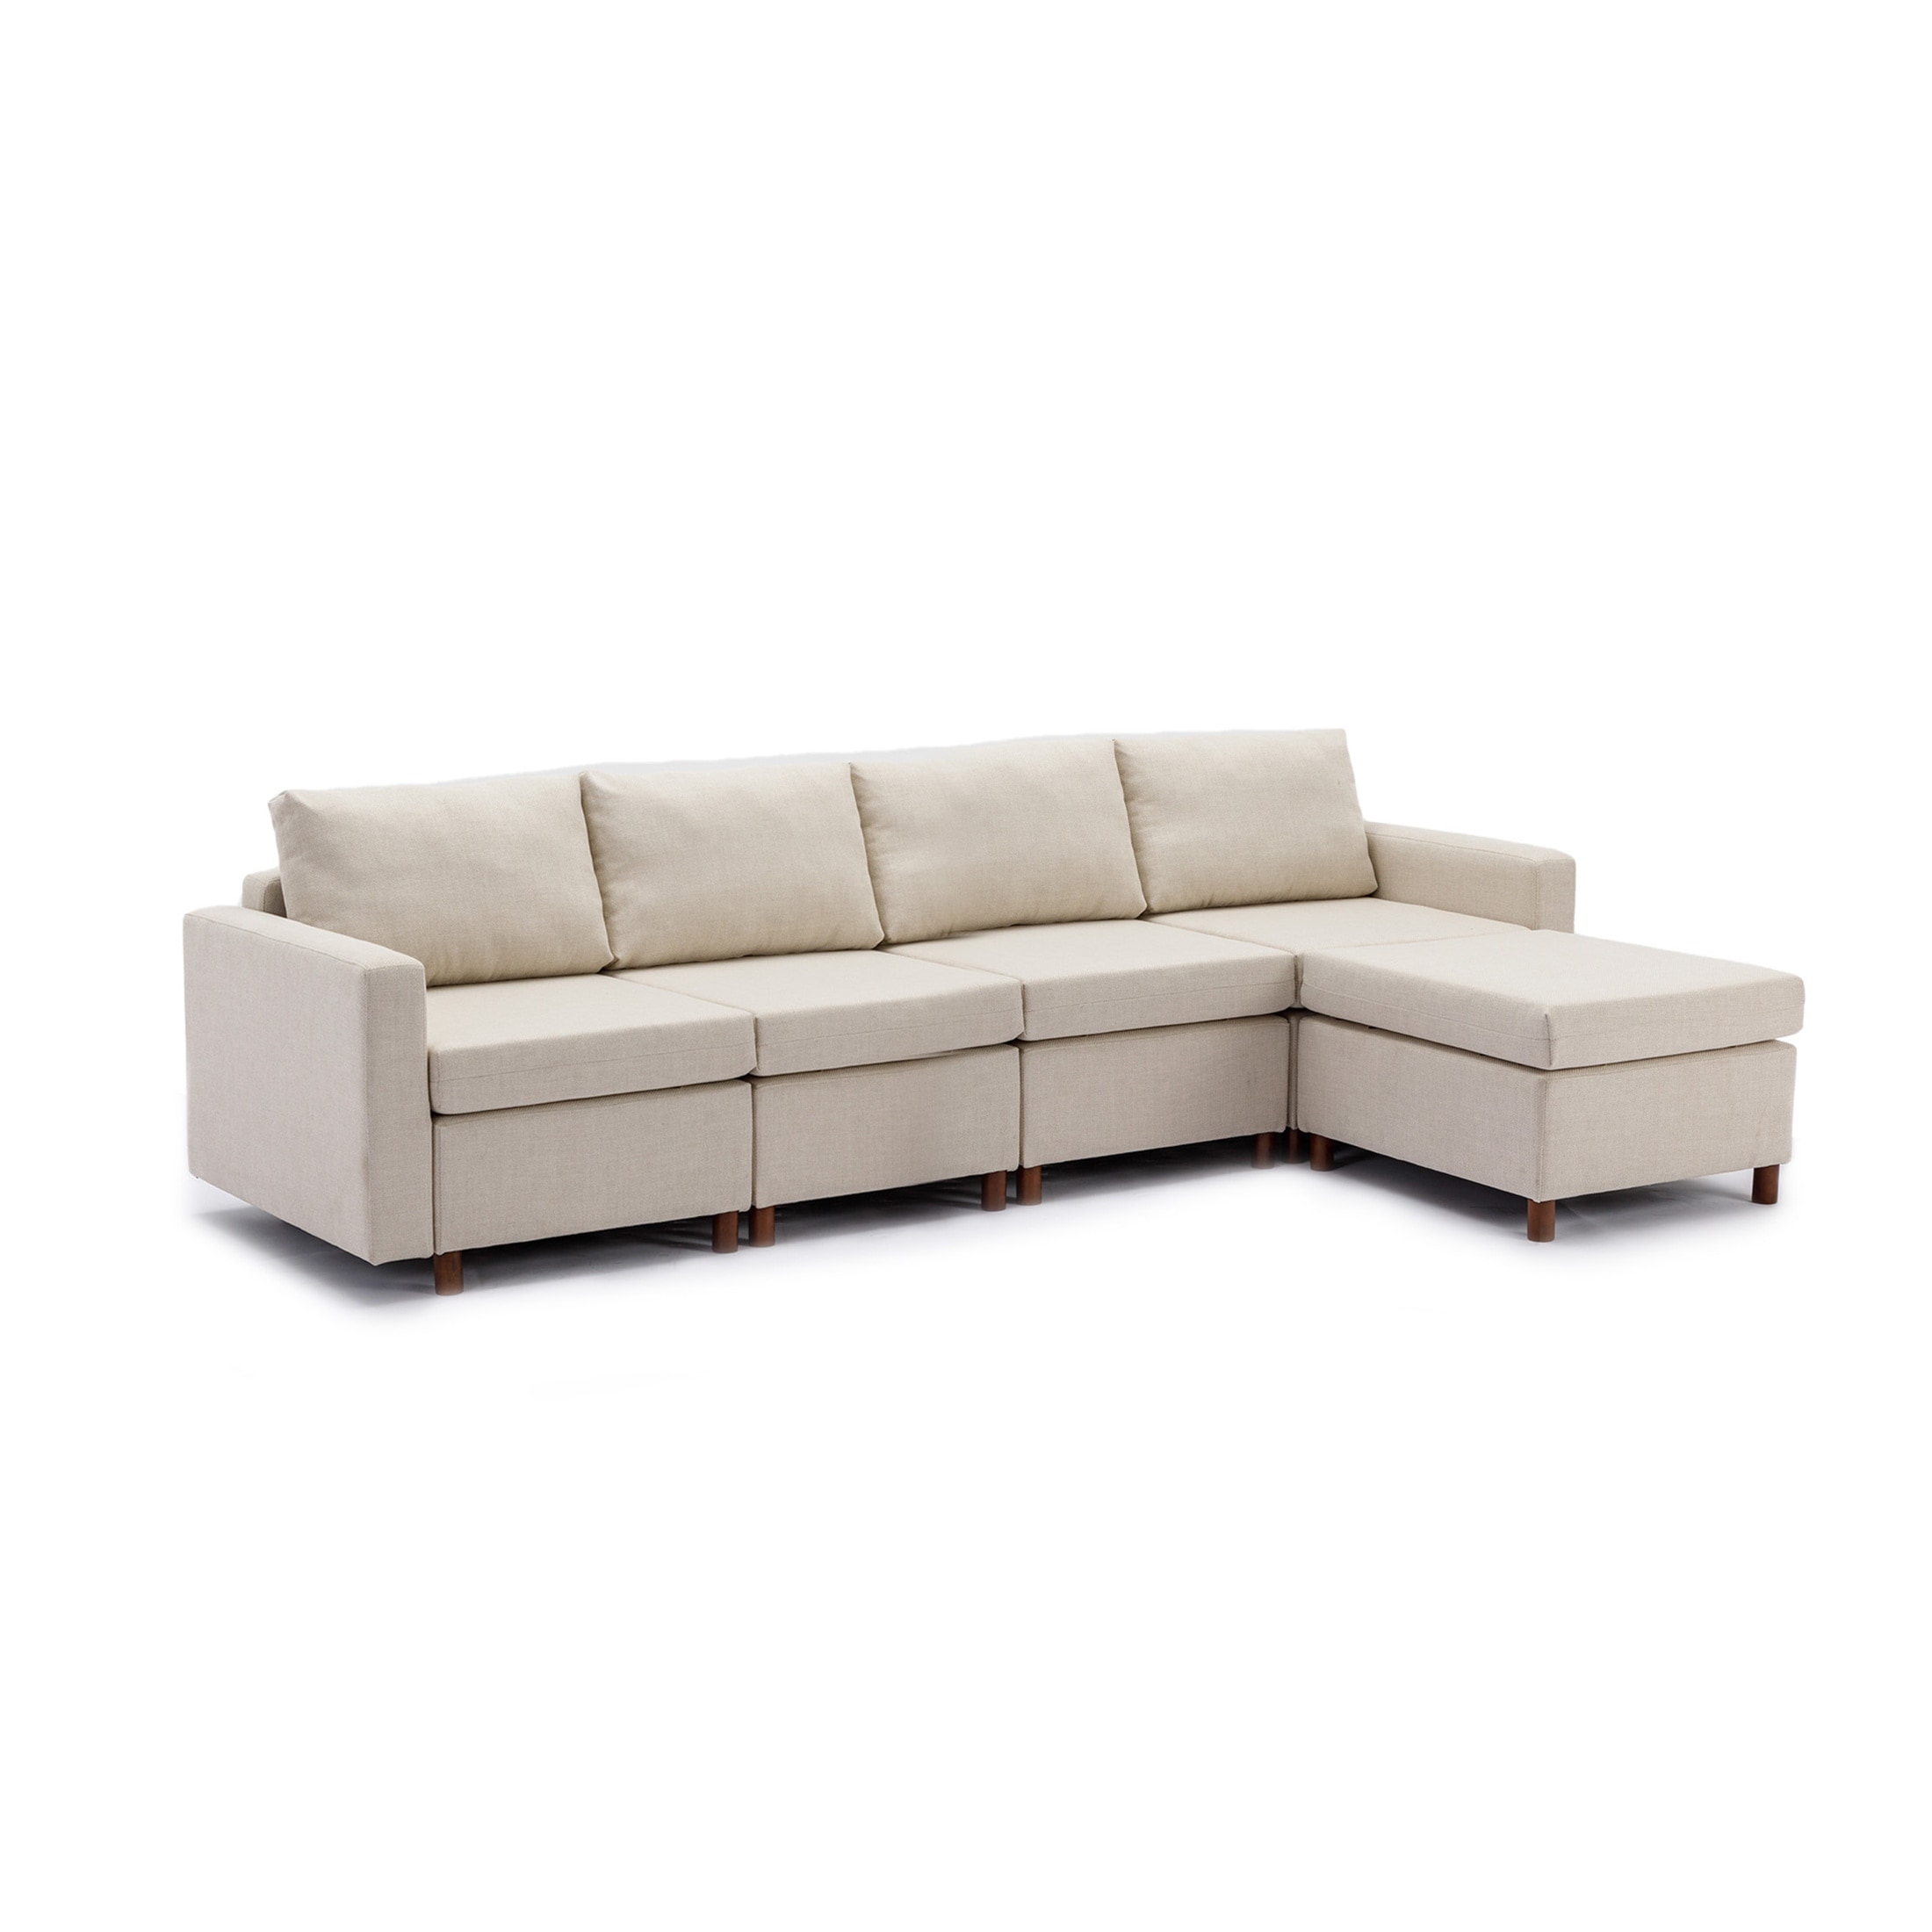 4 Seat Module Sectional Sofa Couch With 1 Ottoman For Living Room